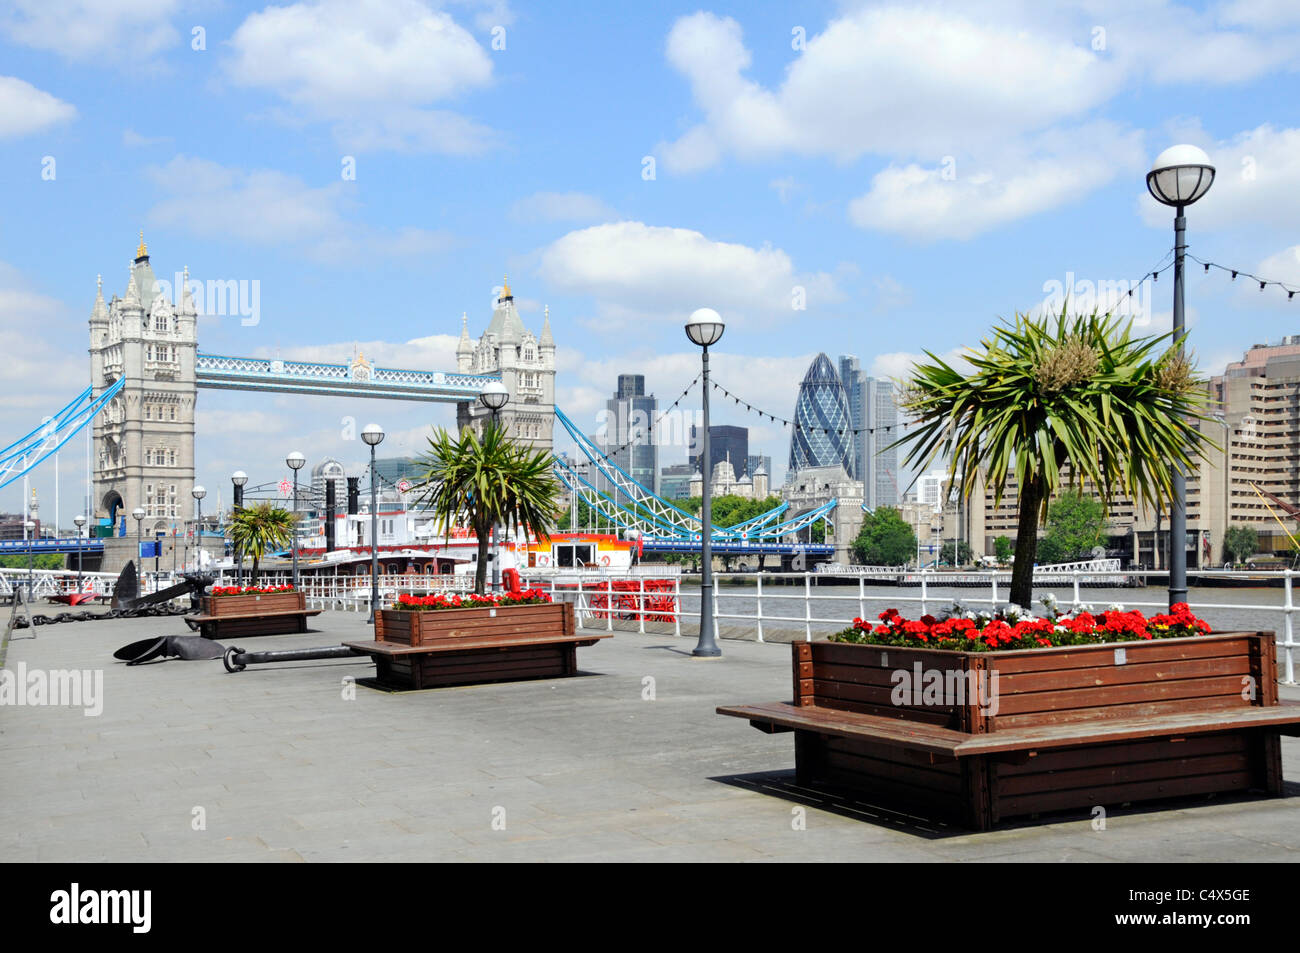 Butlers Wharf Thames Path promenade beside River Thames views of Tower Bridge & City of London skyline row cordyline trees red flowers in planters UK Stock Photo